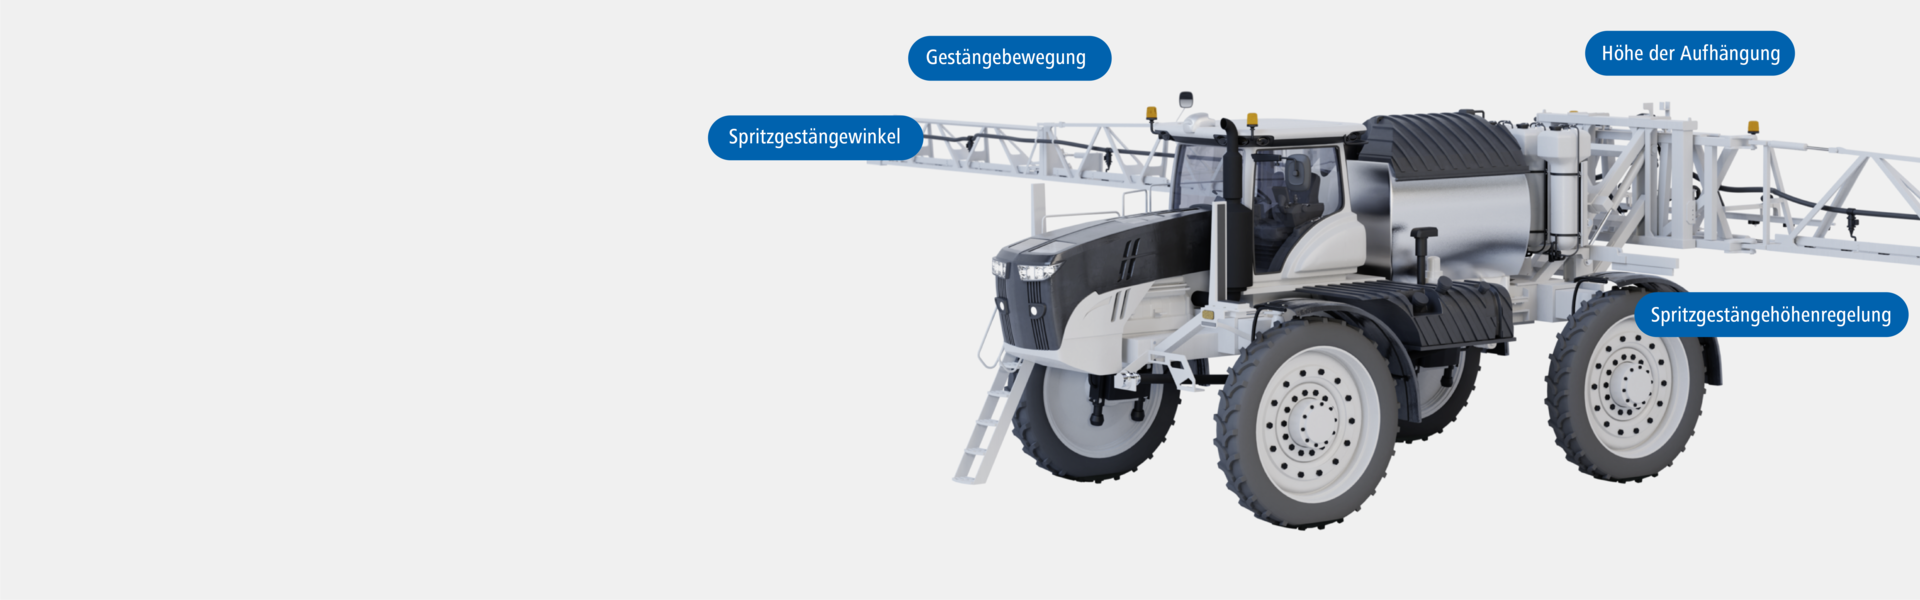 DE-Zchn-Overview-Mobile-Automation-SprayerBoomHeightAgri-bg-screen.png